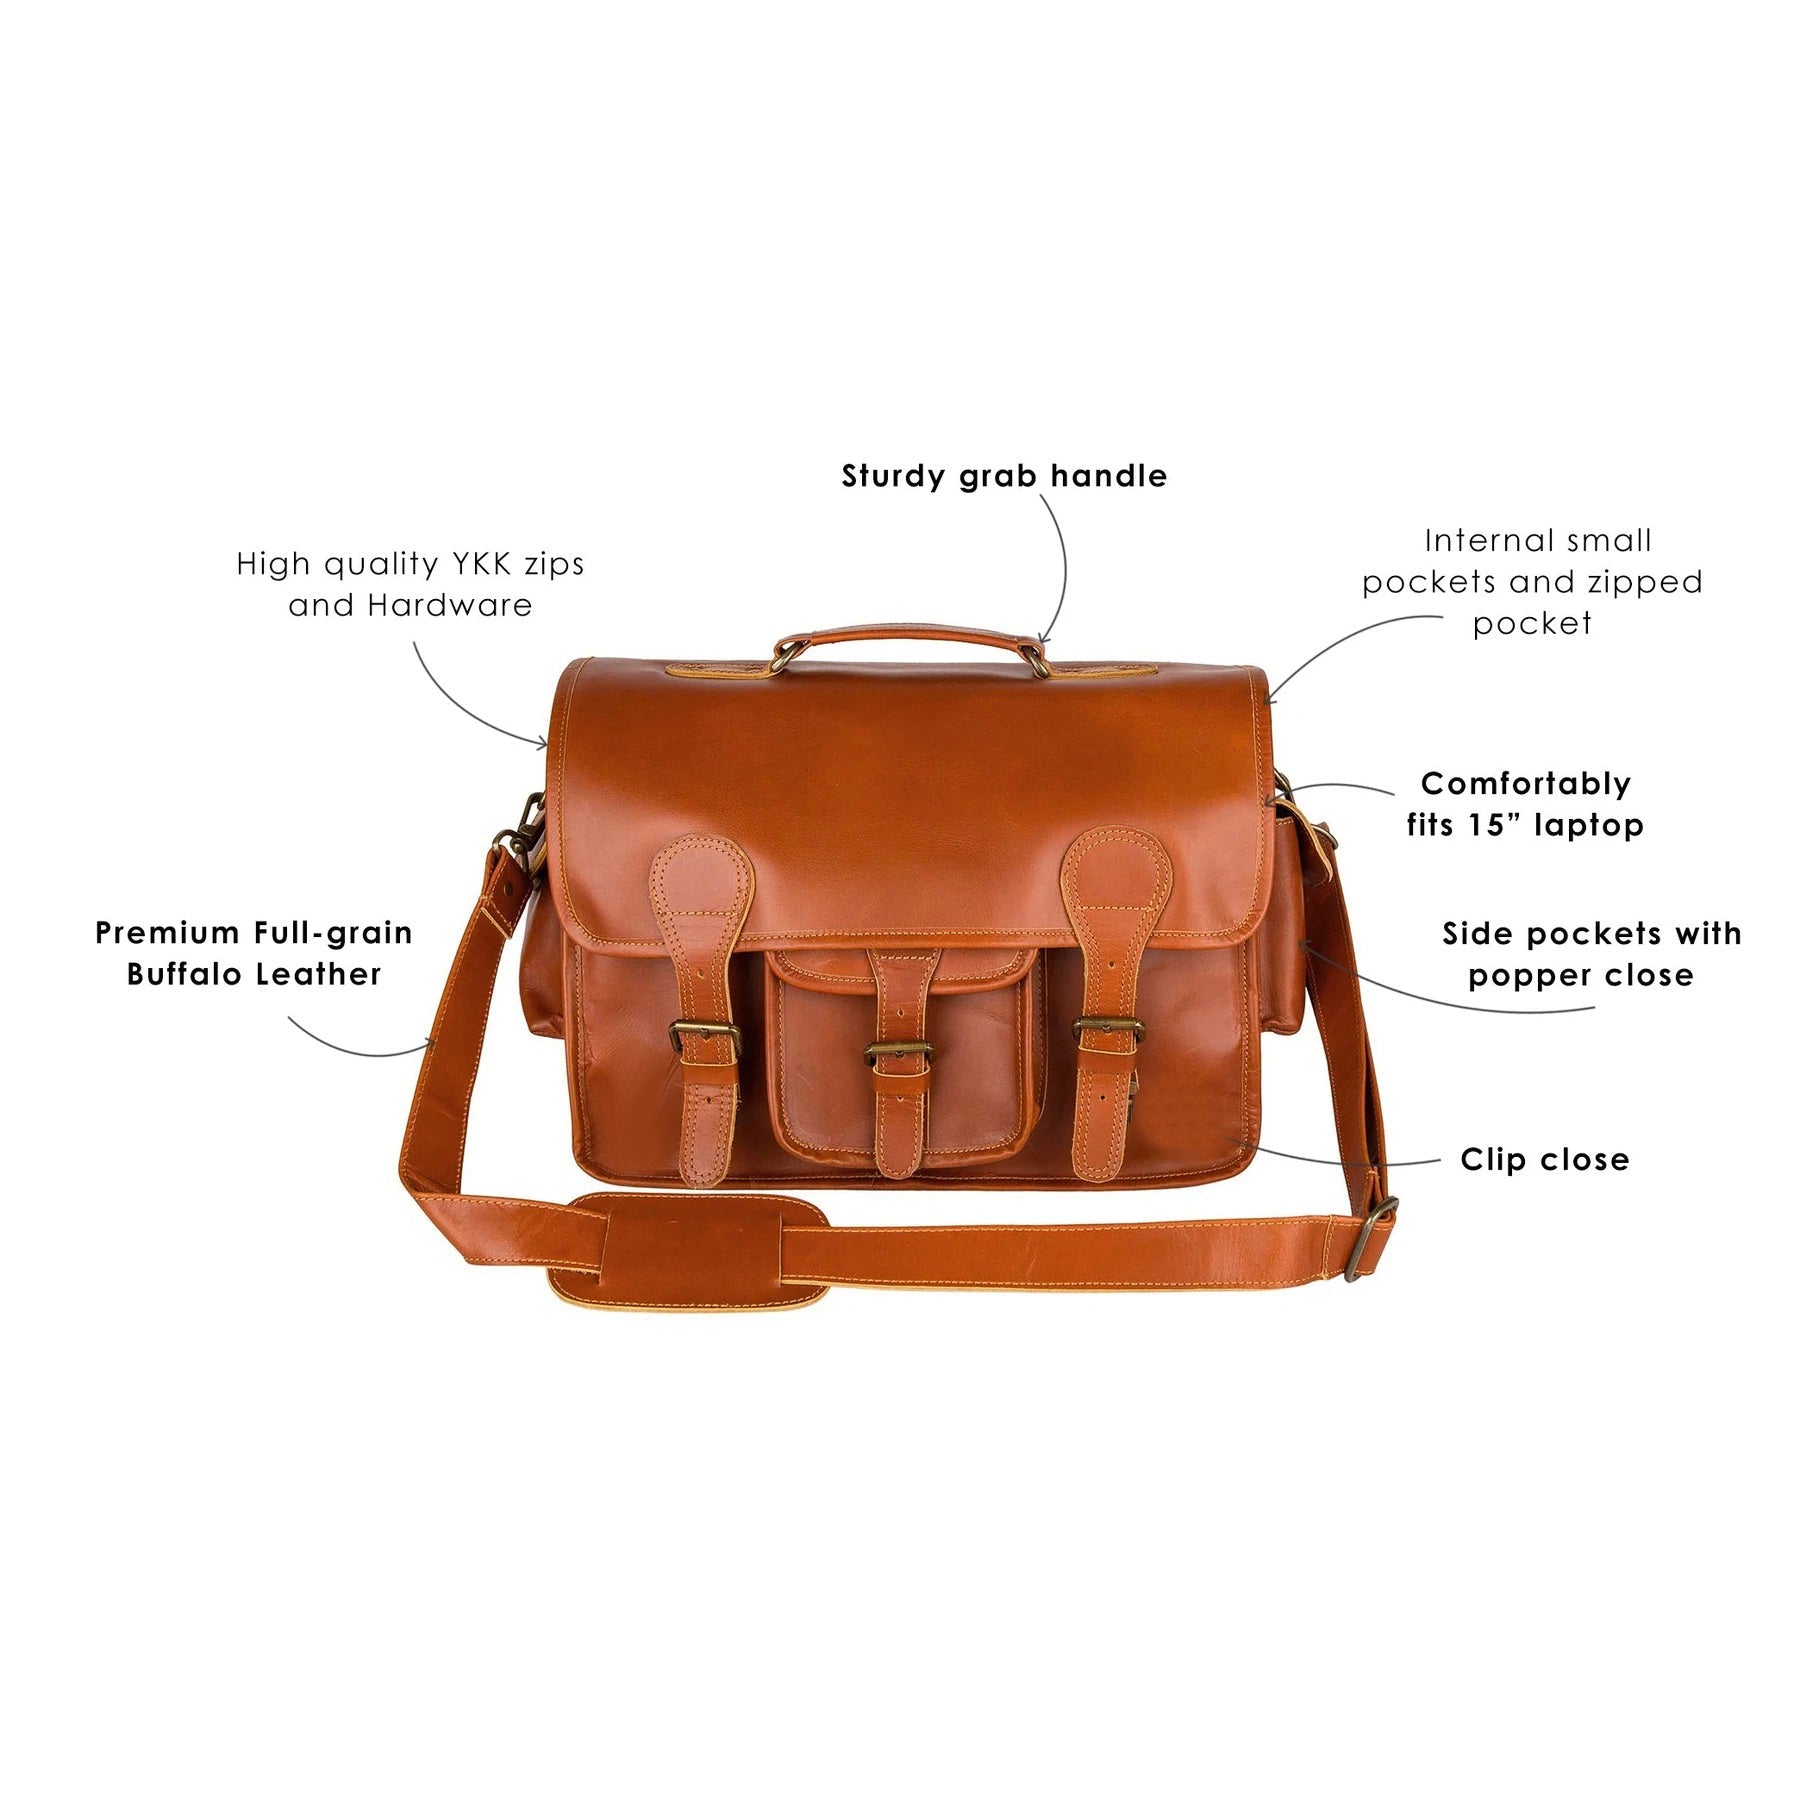 Leather Tan leather Leather Satchels